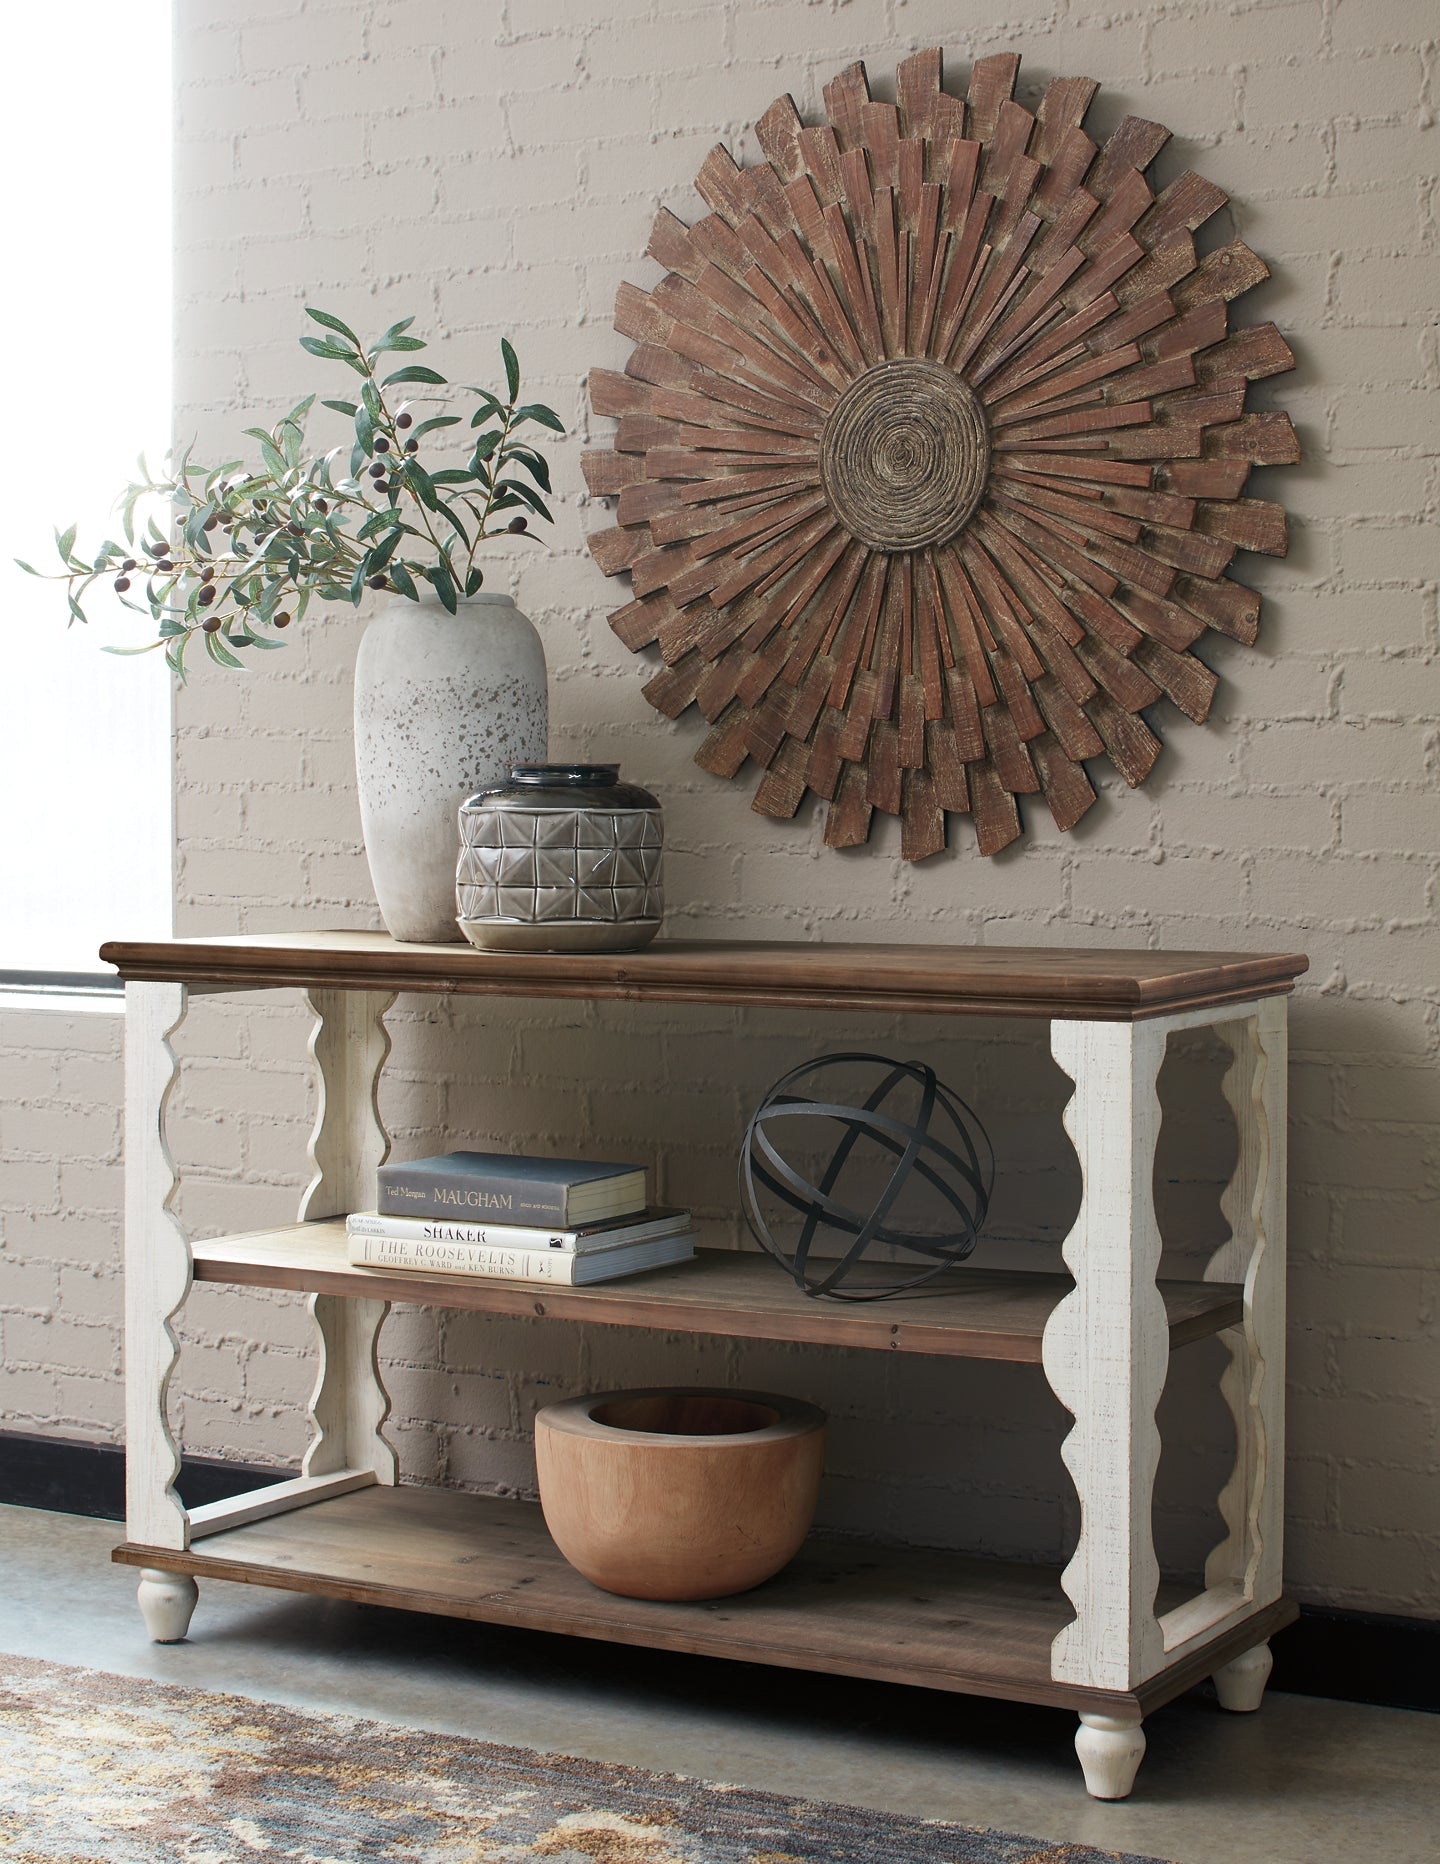 Alwyndale Console Sofa Table Smyrna Furniture Outlet